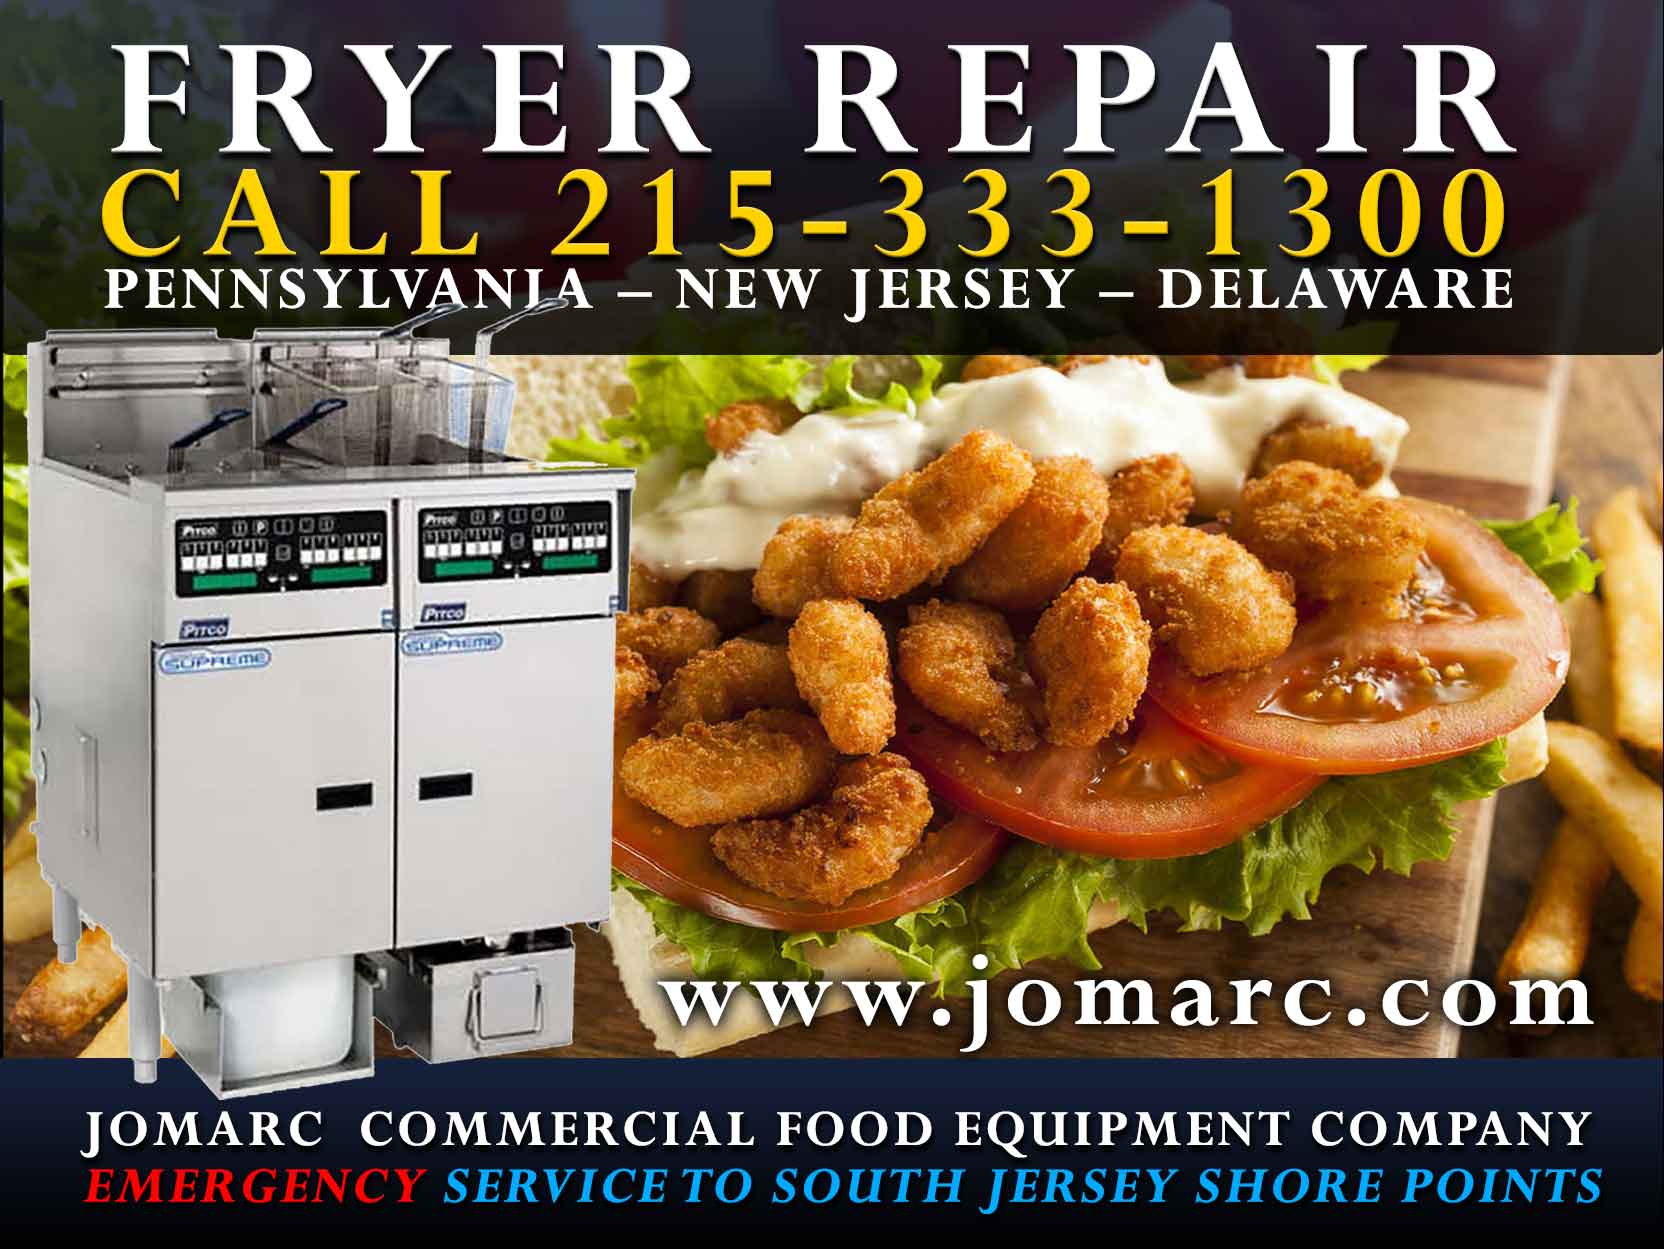 Commercial Range Repair Bucks County Philadelphia Jomarc repairs all types of Standard Duty/Heavy Duty Gas Electric , Countertop Gas Electric  with or without Griddle, Induction Ranges and Cookers, Portable Buffet Drop-In, Stock Pot, Wok, Mongolian BBQ Ranges/ Step-Up Countertop Gas